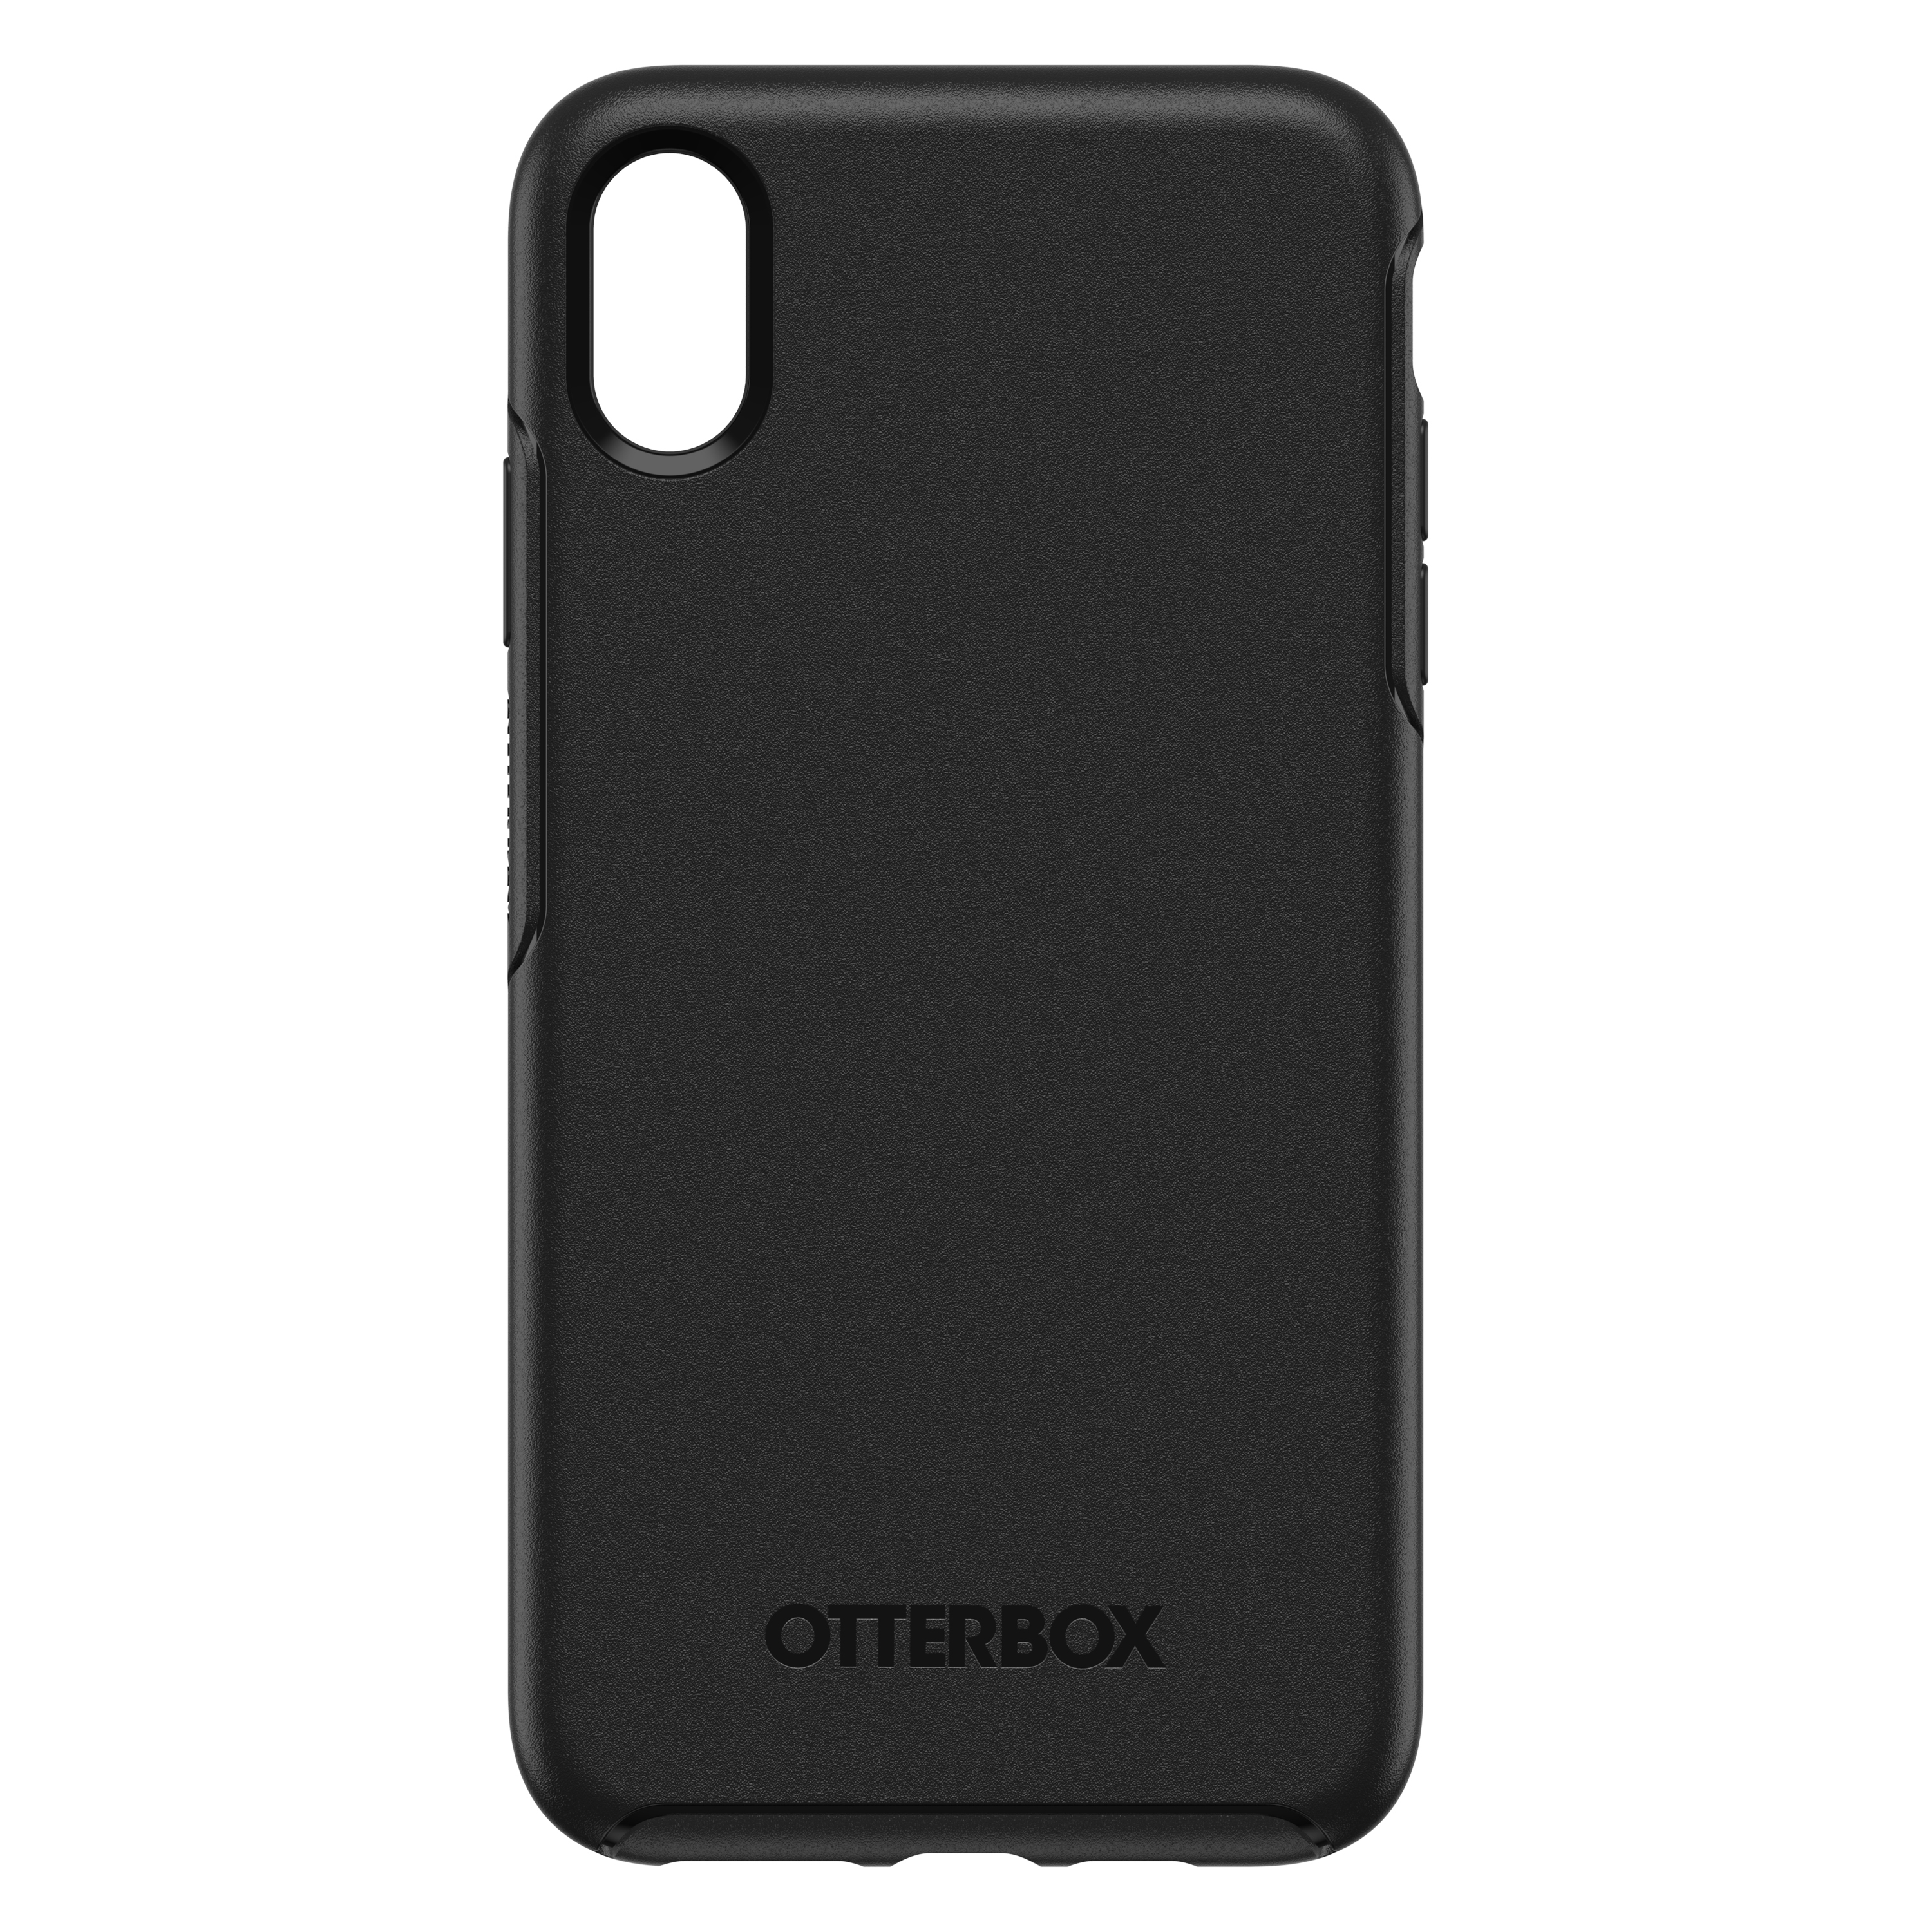 Backcover, Max, iPhone Schwarz XS Symmetry, Apple, OTTERBOX